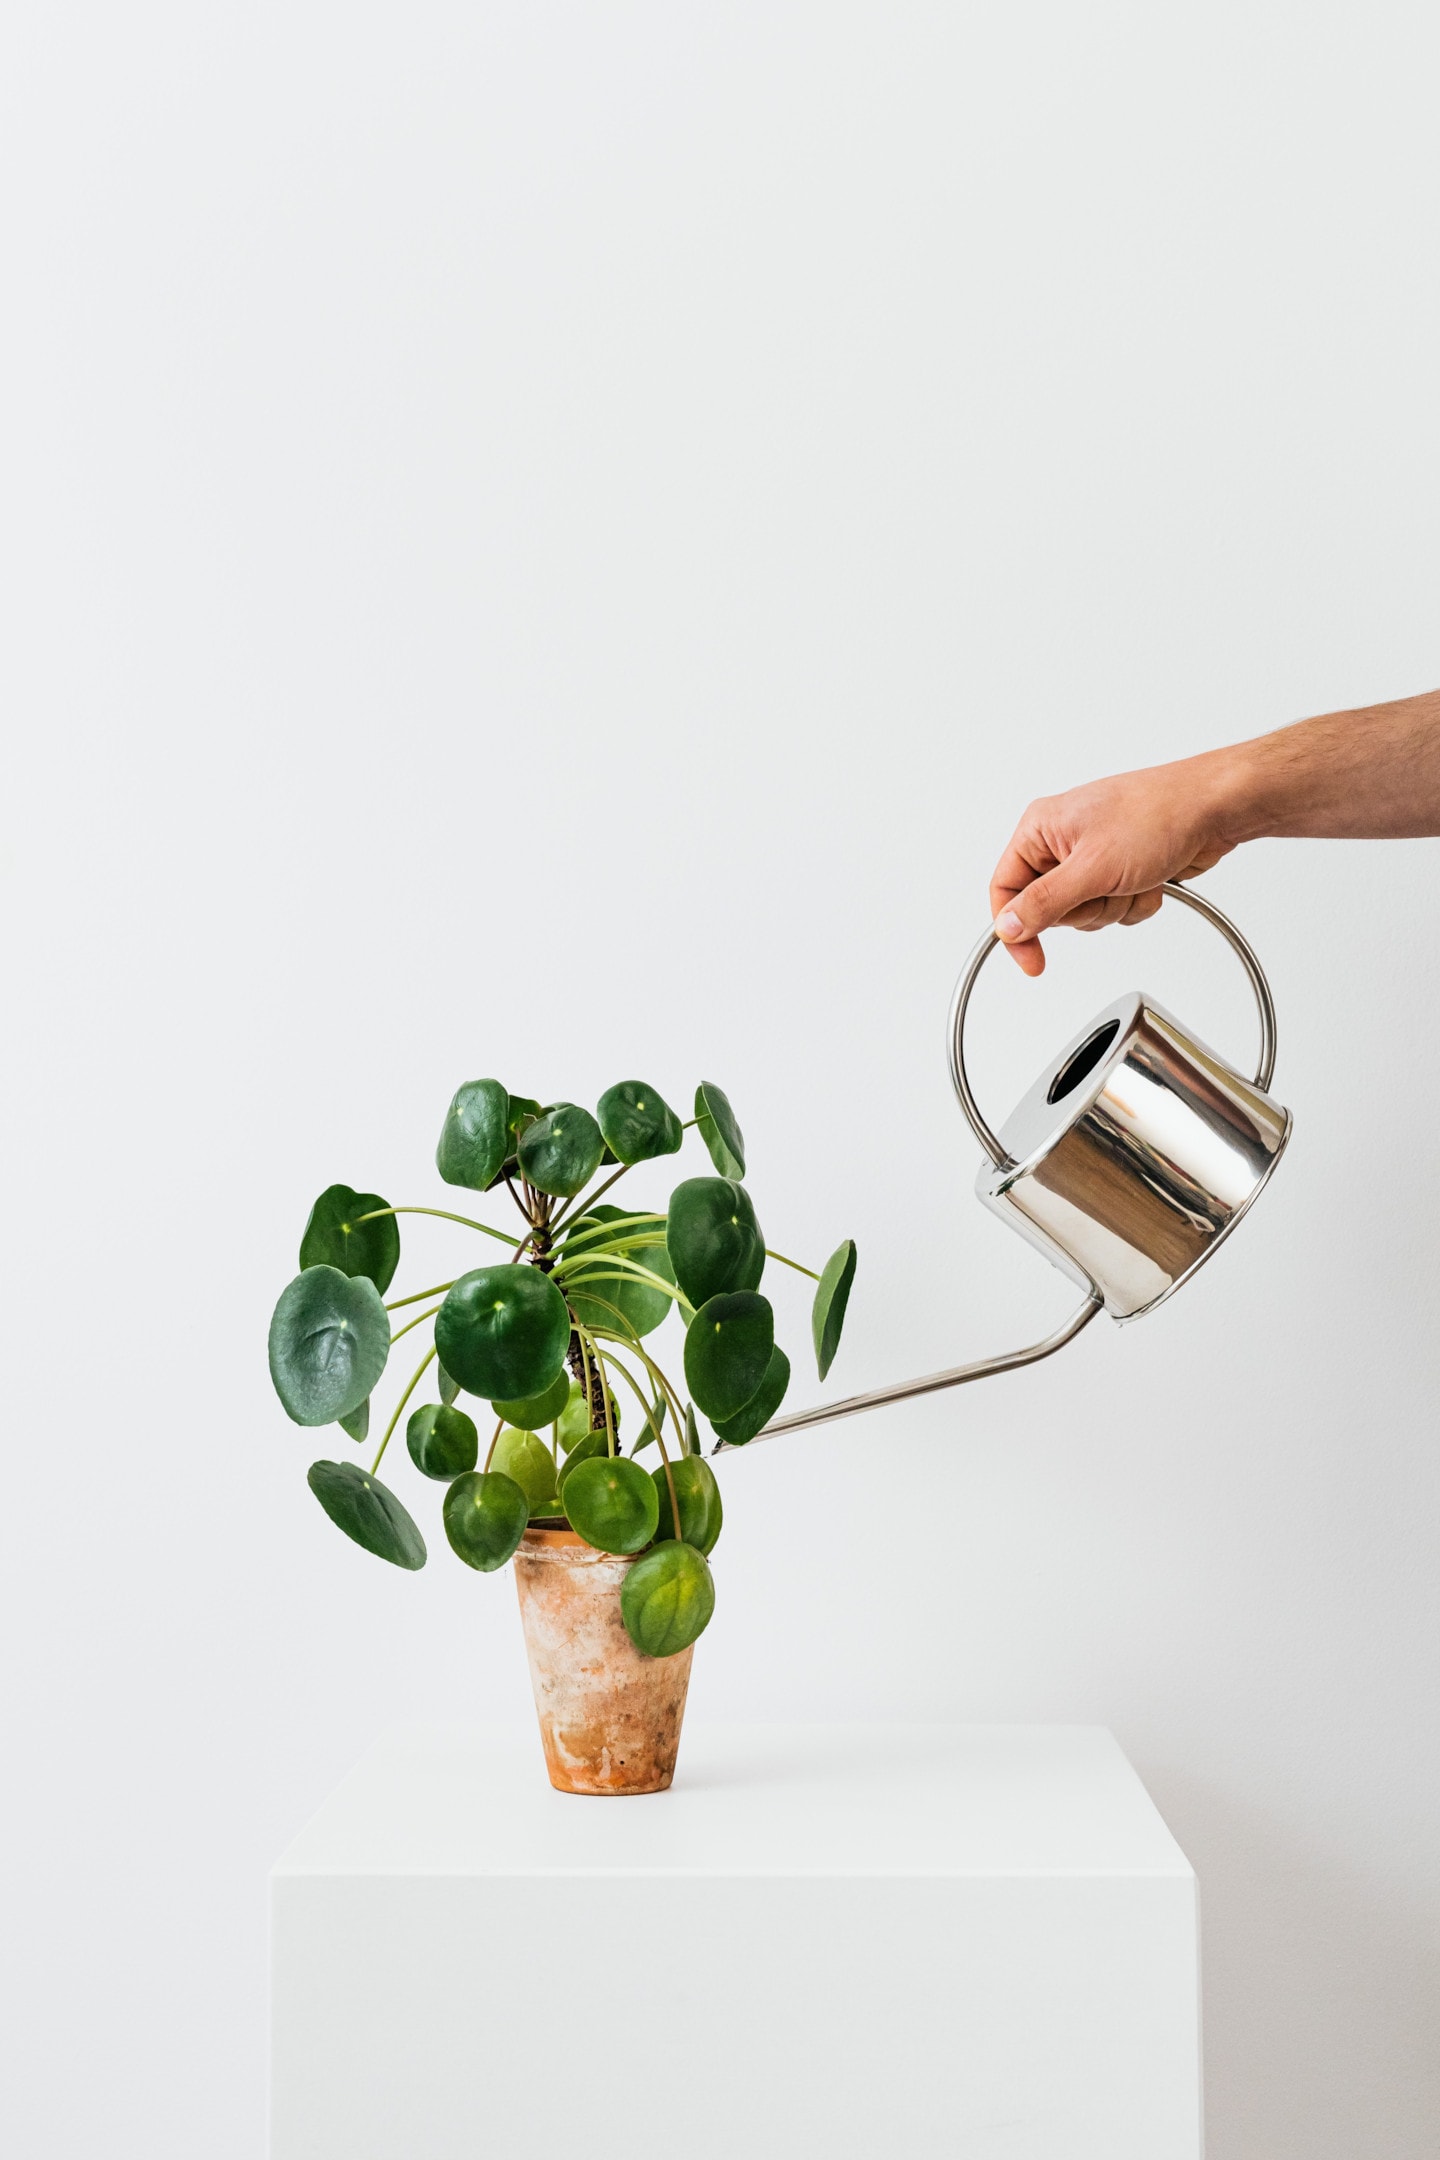 watering a pilea plant